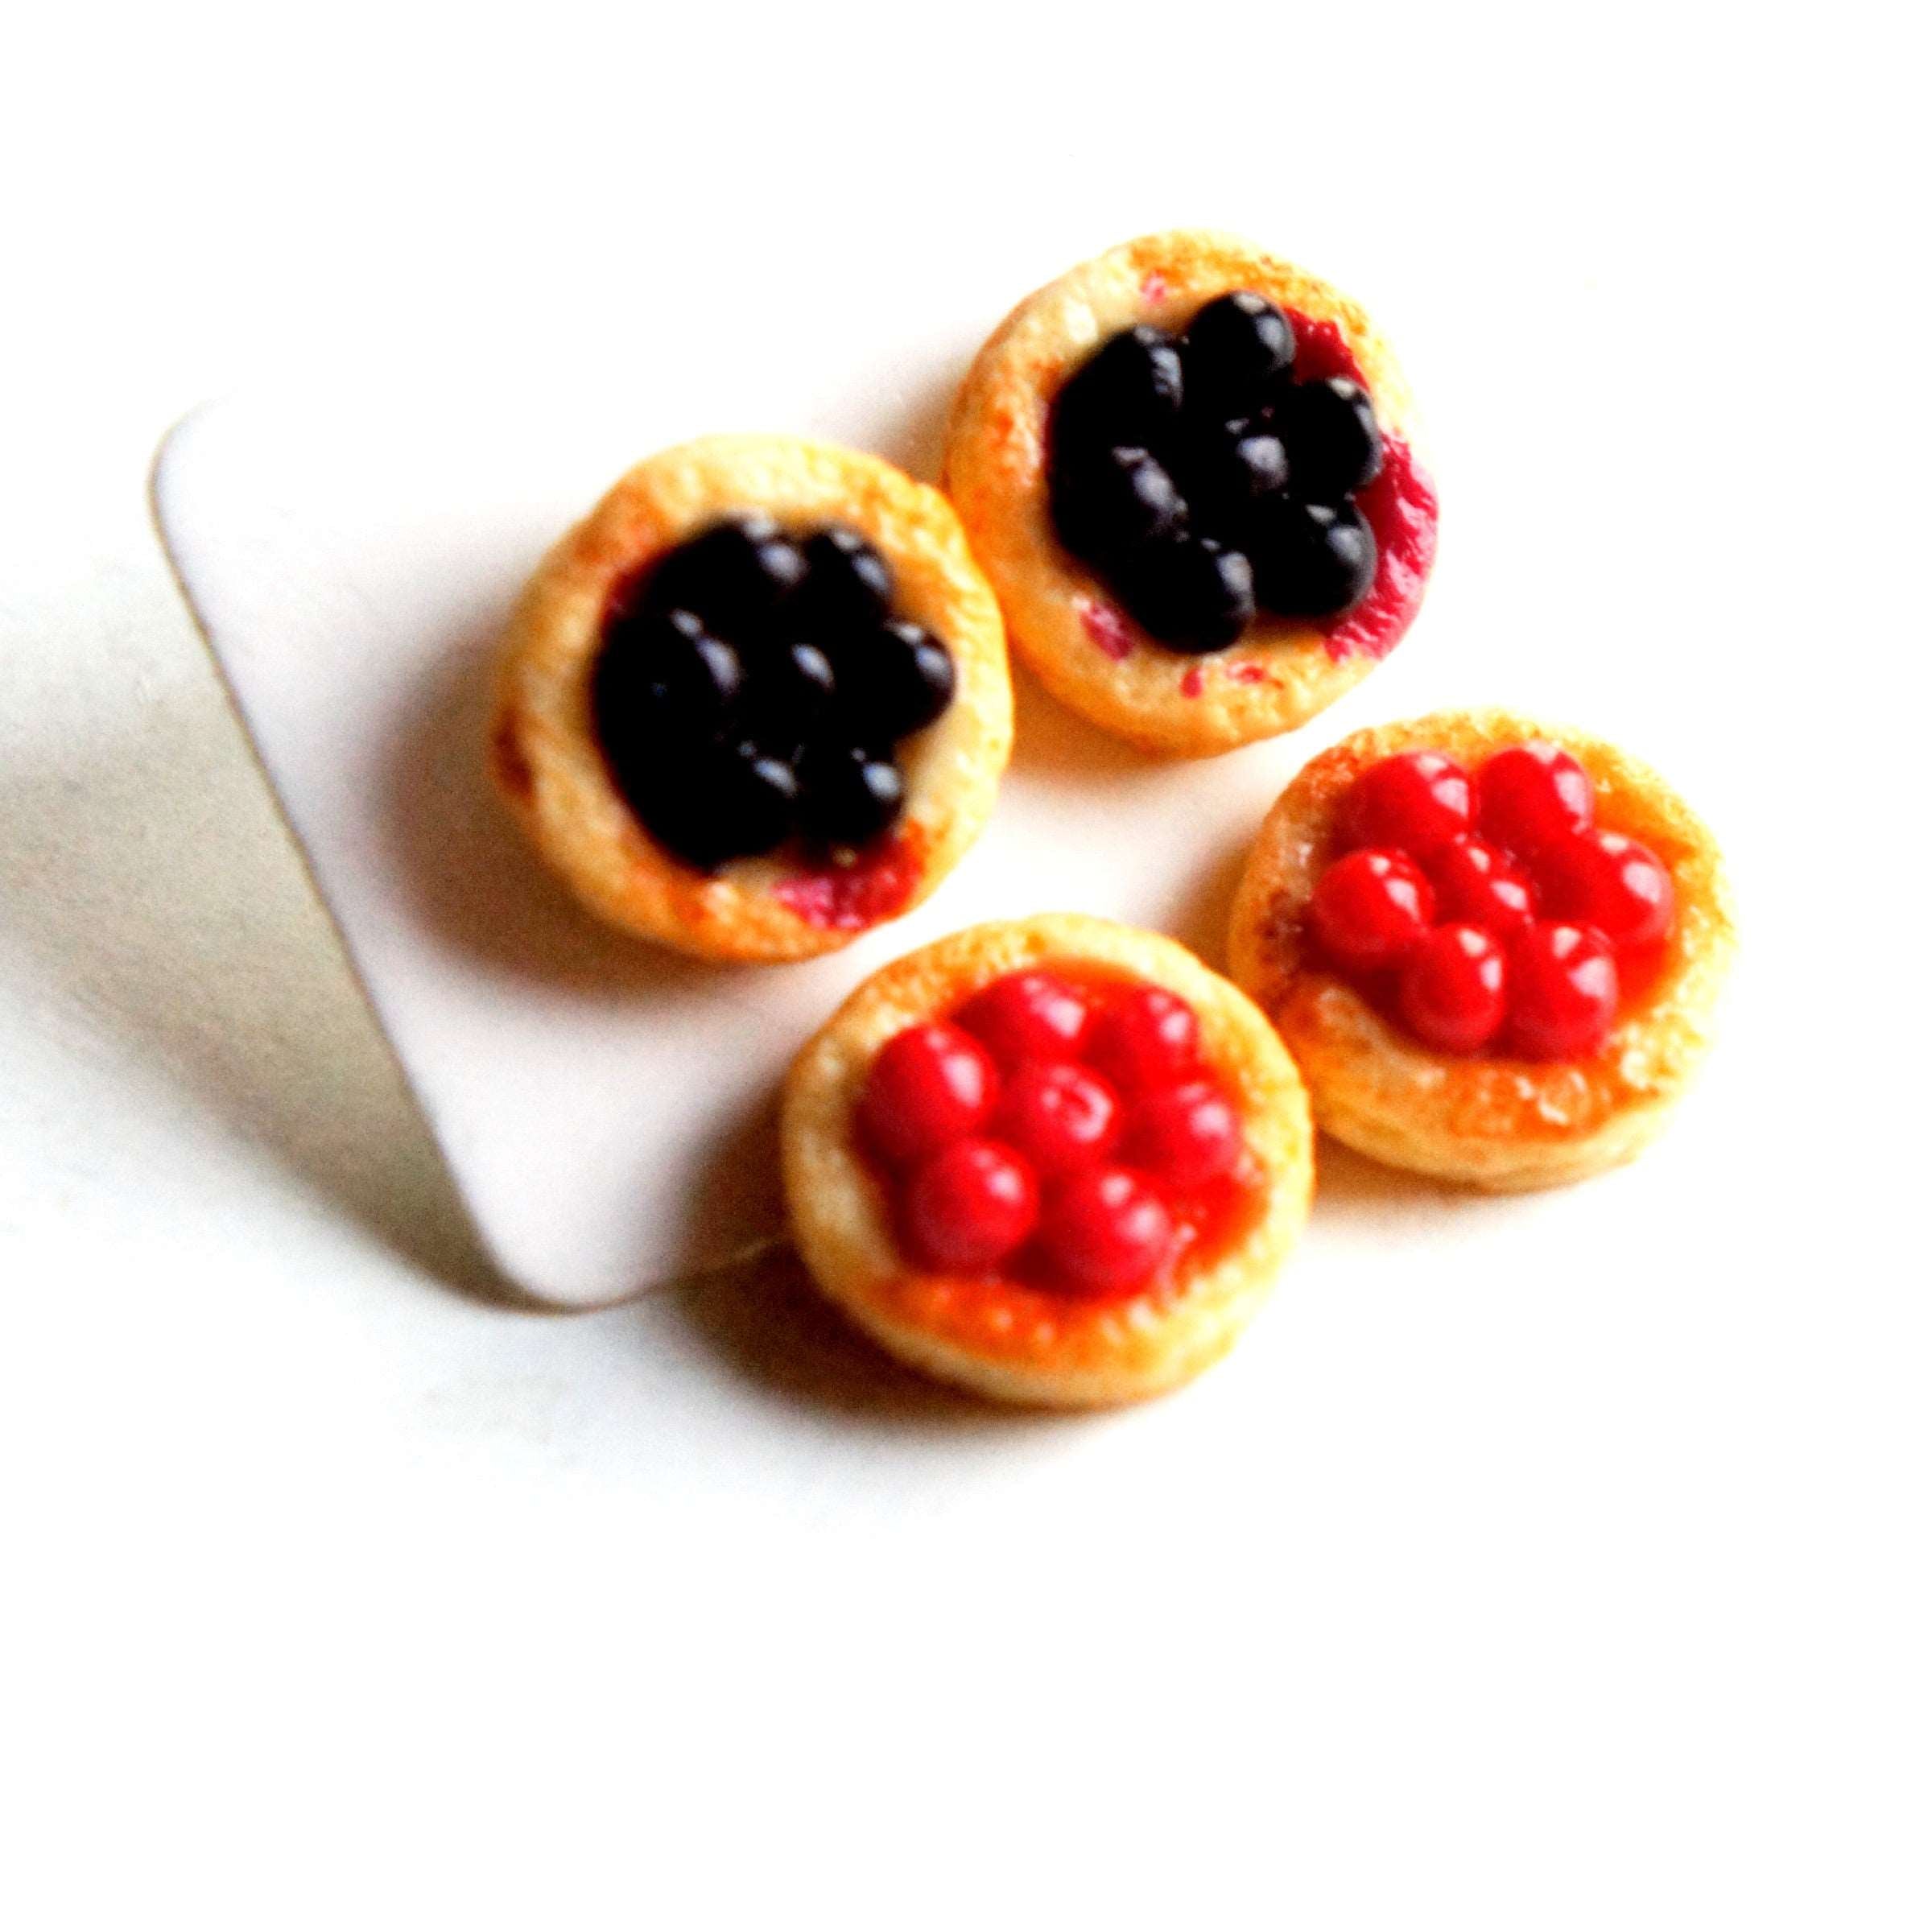 Cherry Sponge Cake Earrings - Jillicious charms and accessories